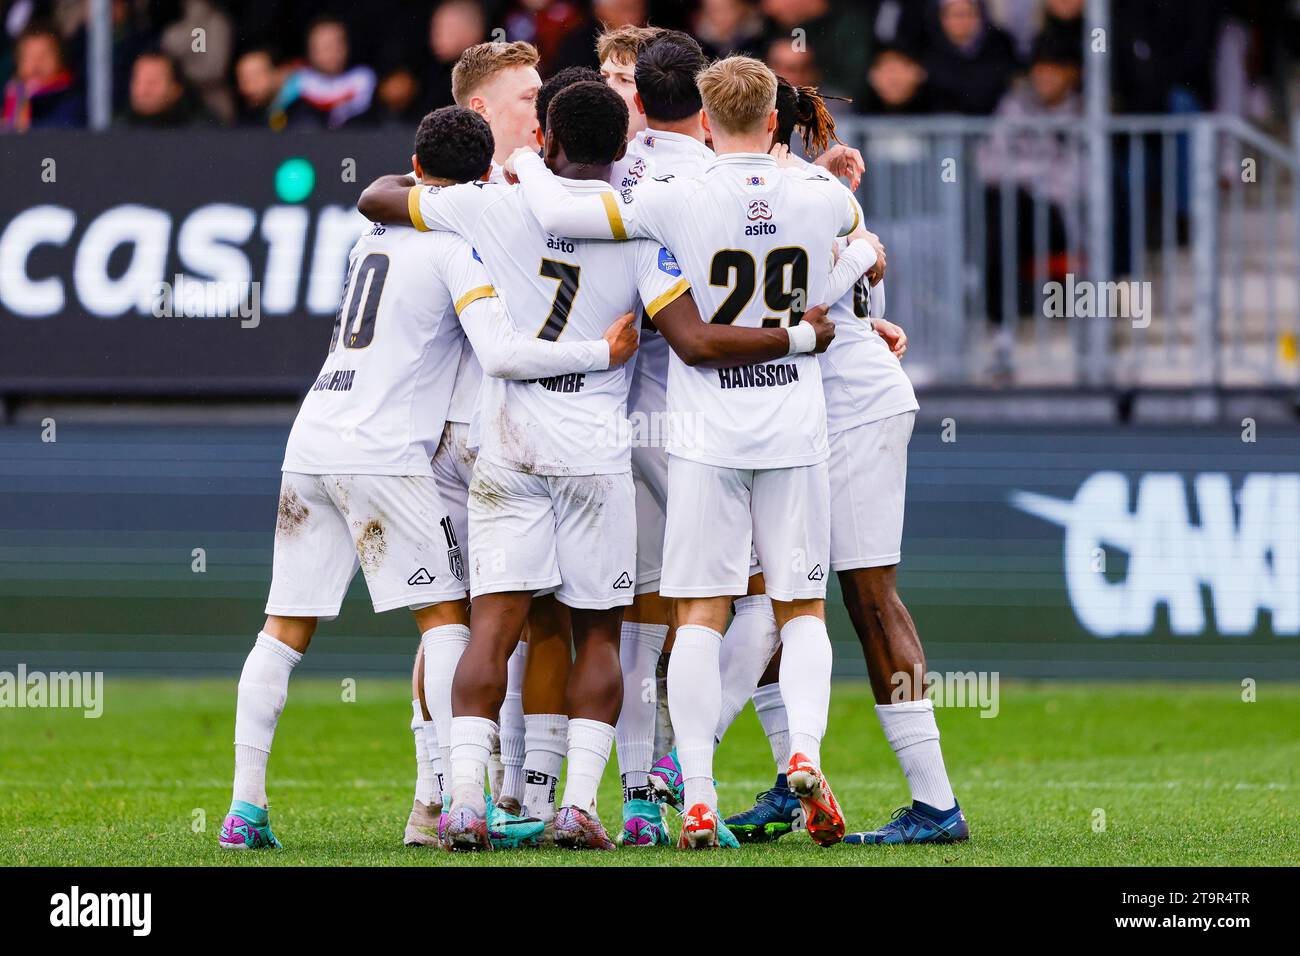 ALMERE, NETHERLANDS - NOVEMBER 26: Mohamed Sankoh (Heracles Almelo) scores the 0-2 celebrating his goal with teammates during the Eredivisie match of Stock Photo